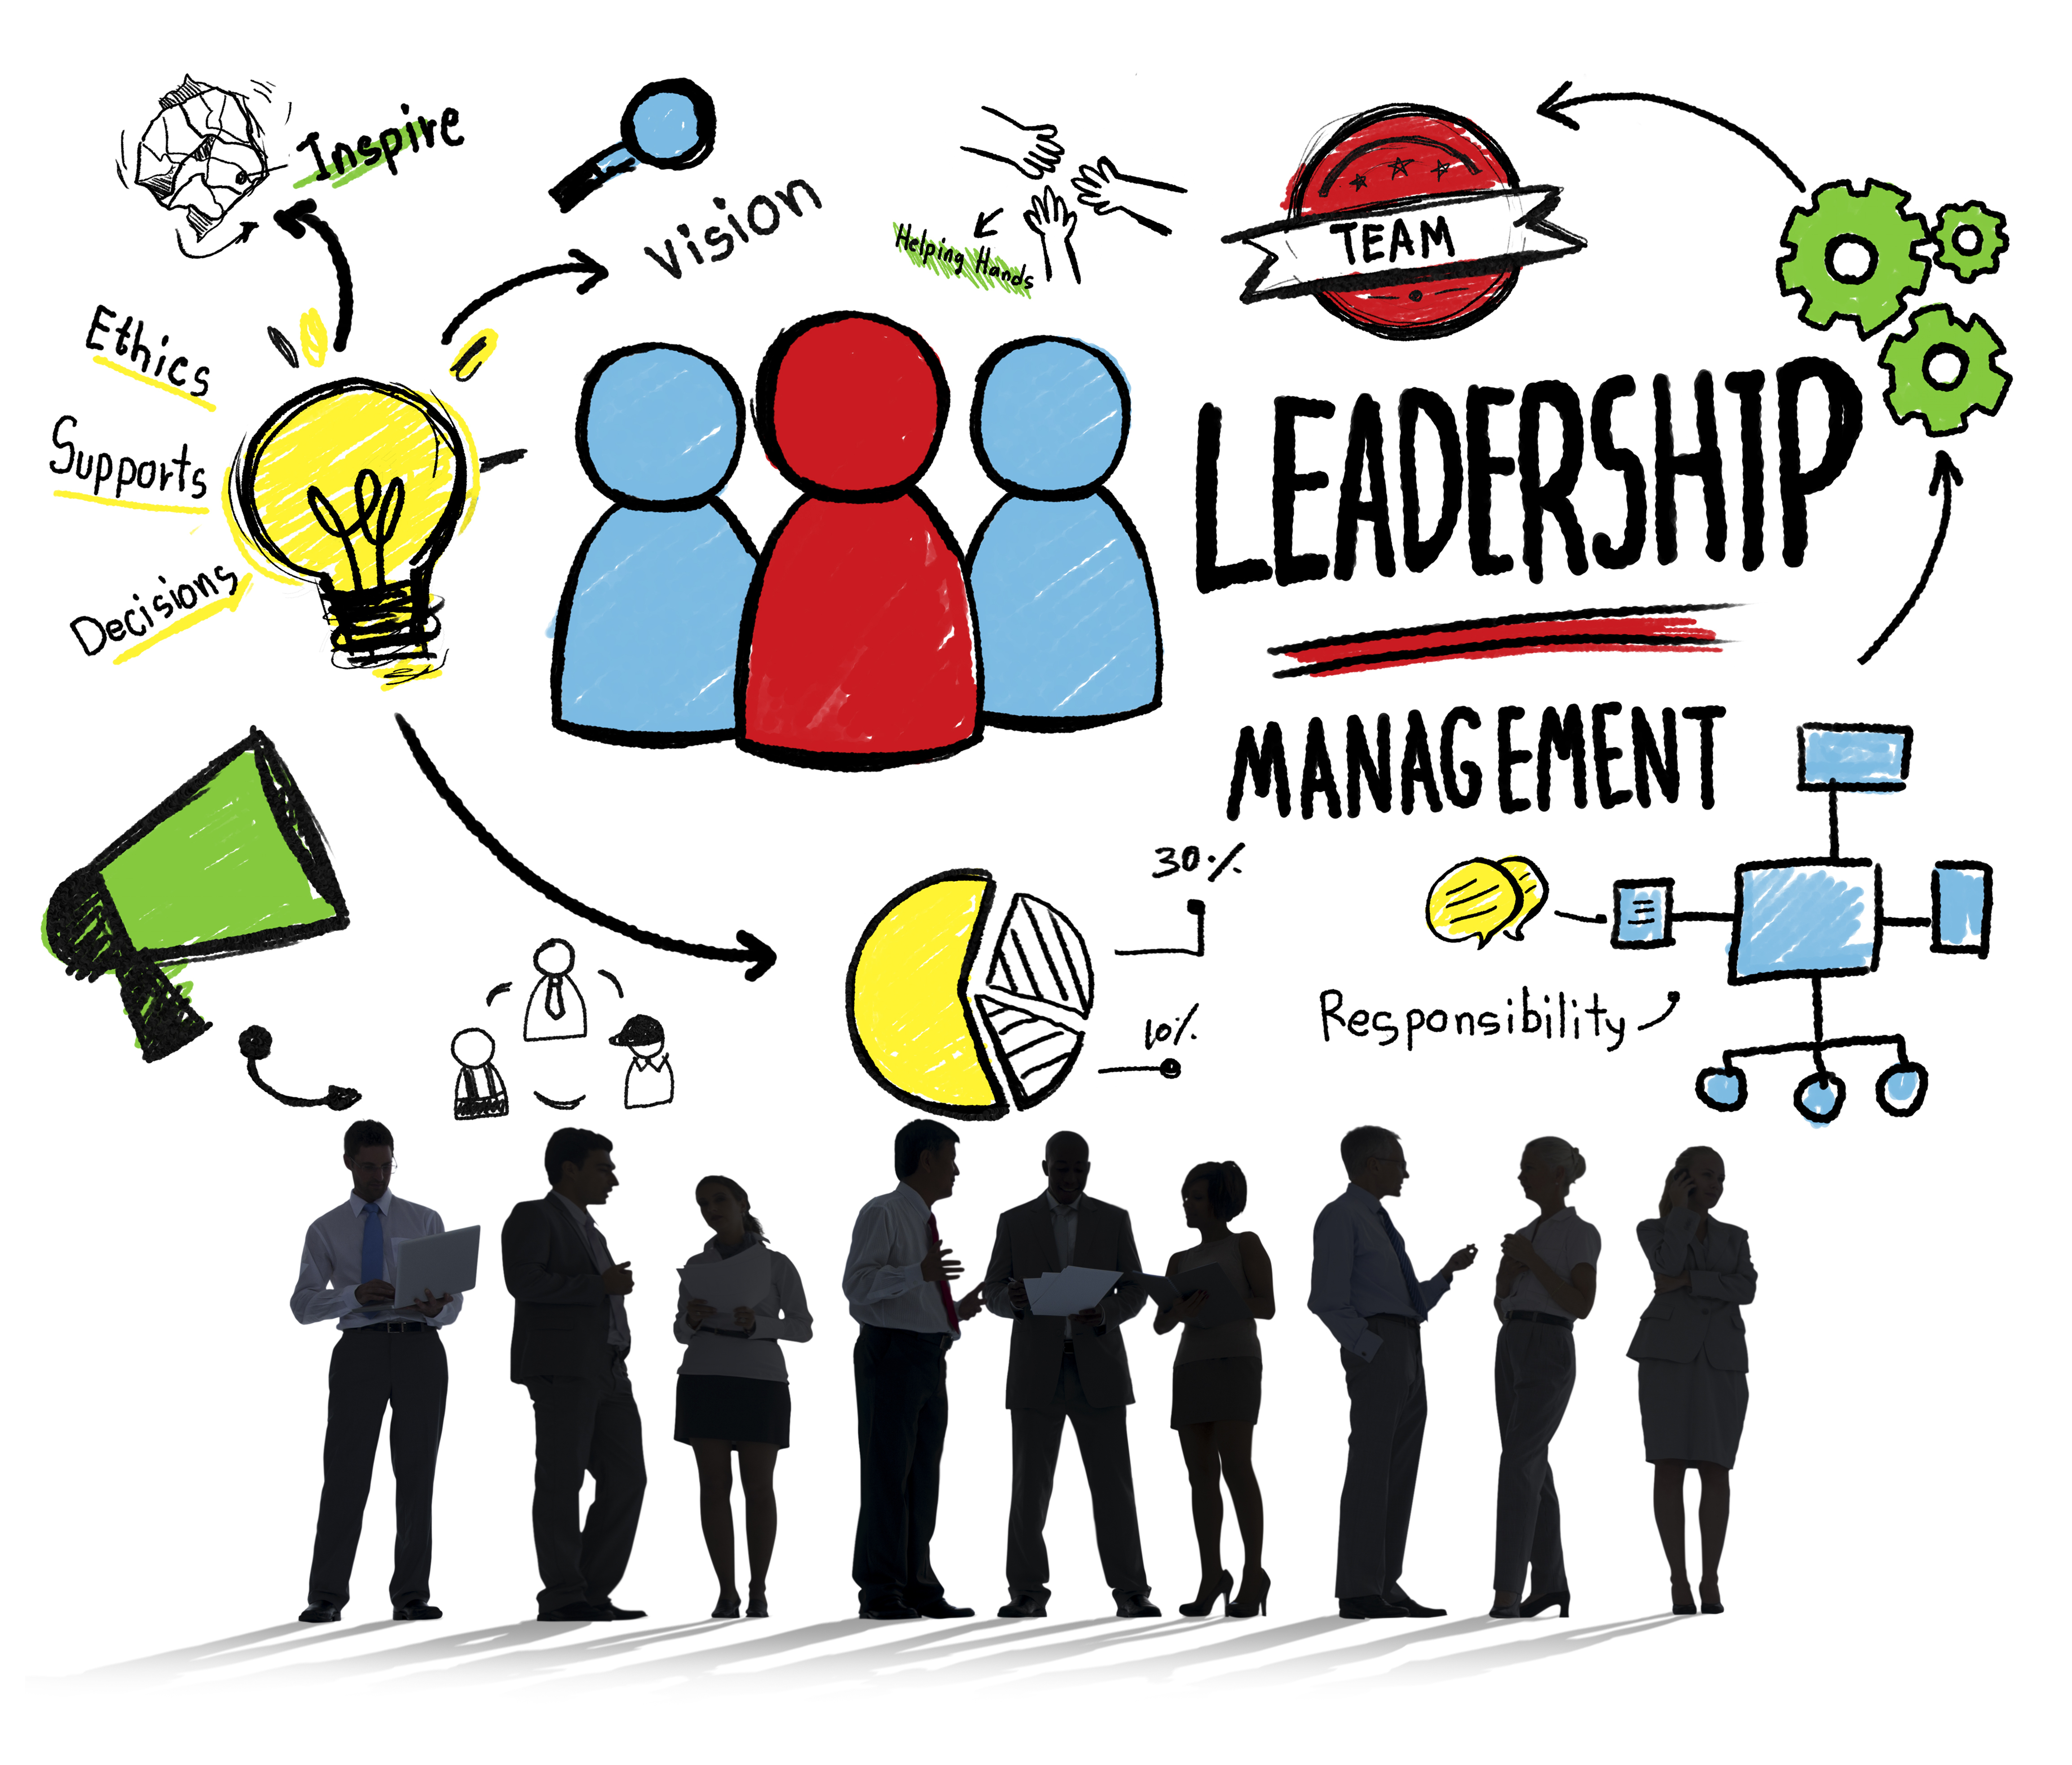 A Leadership and Management